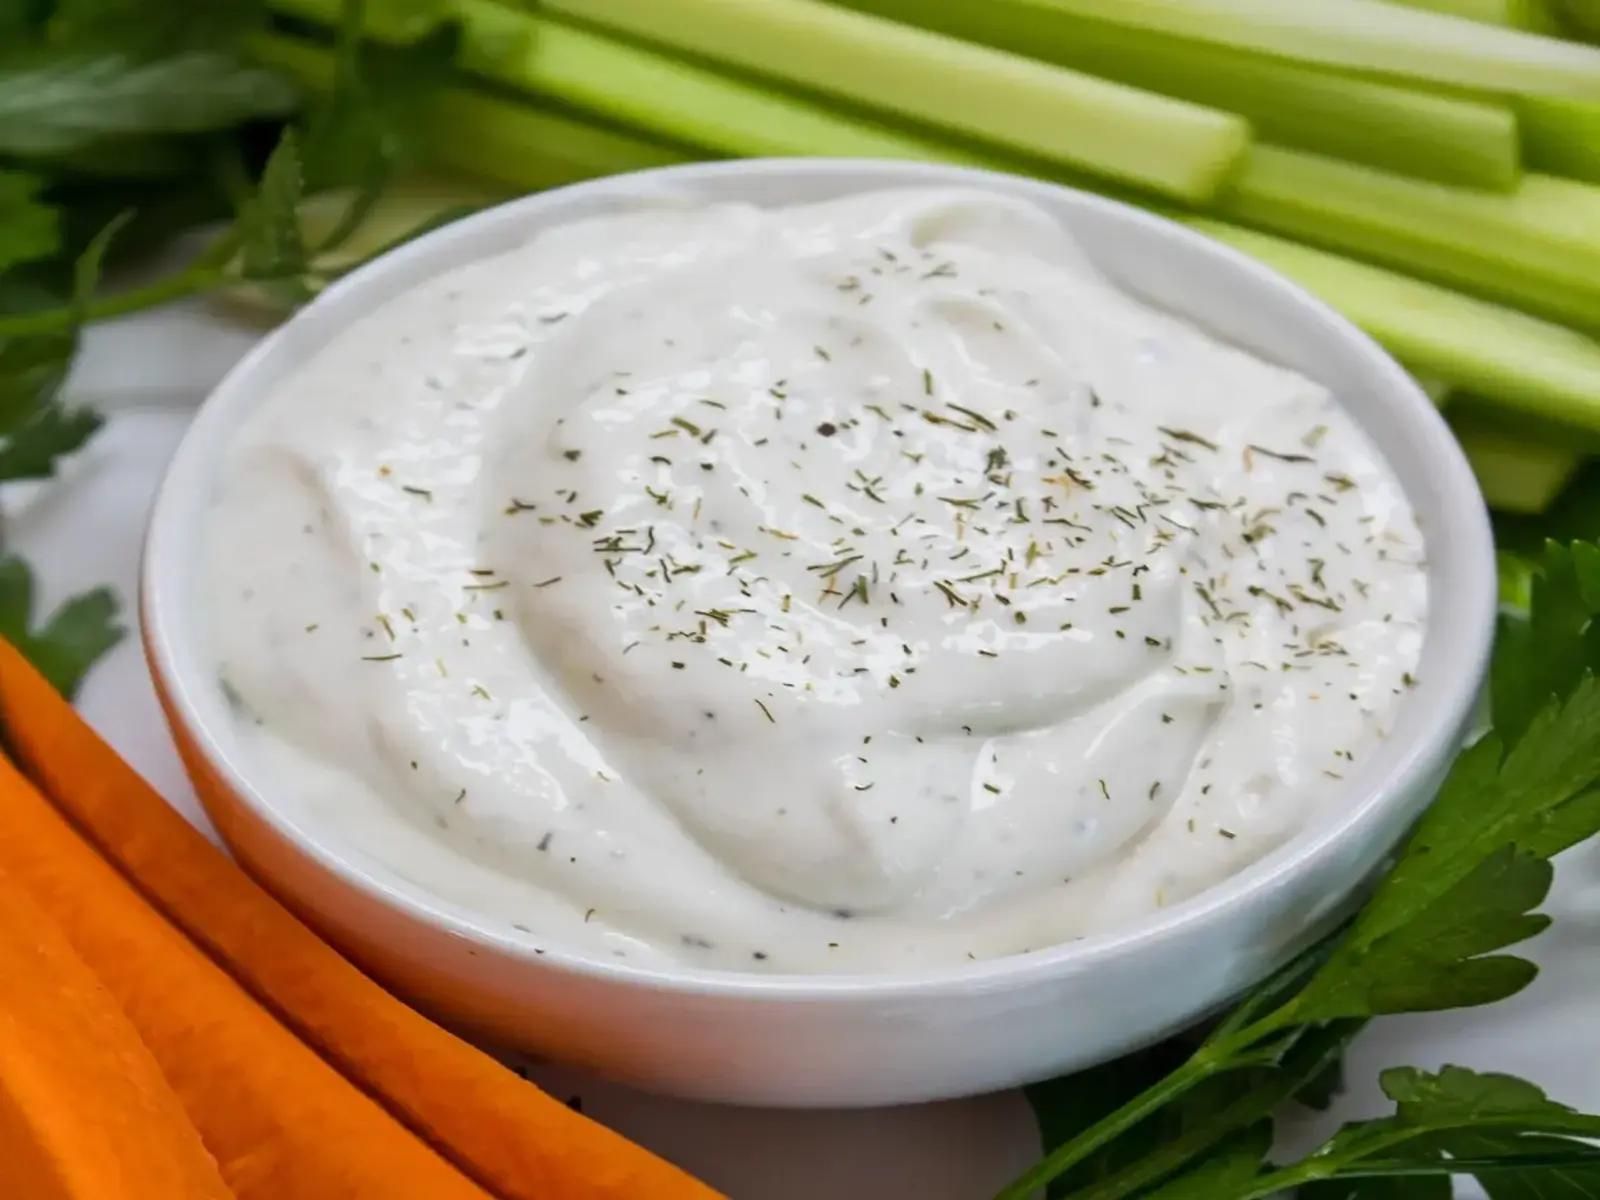 19-light-ranch-dressing-nutrition-facts